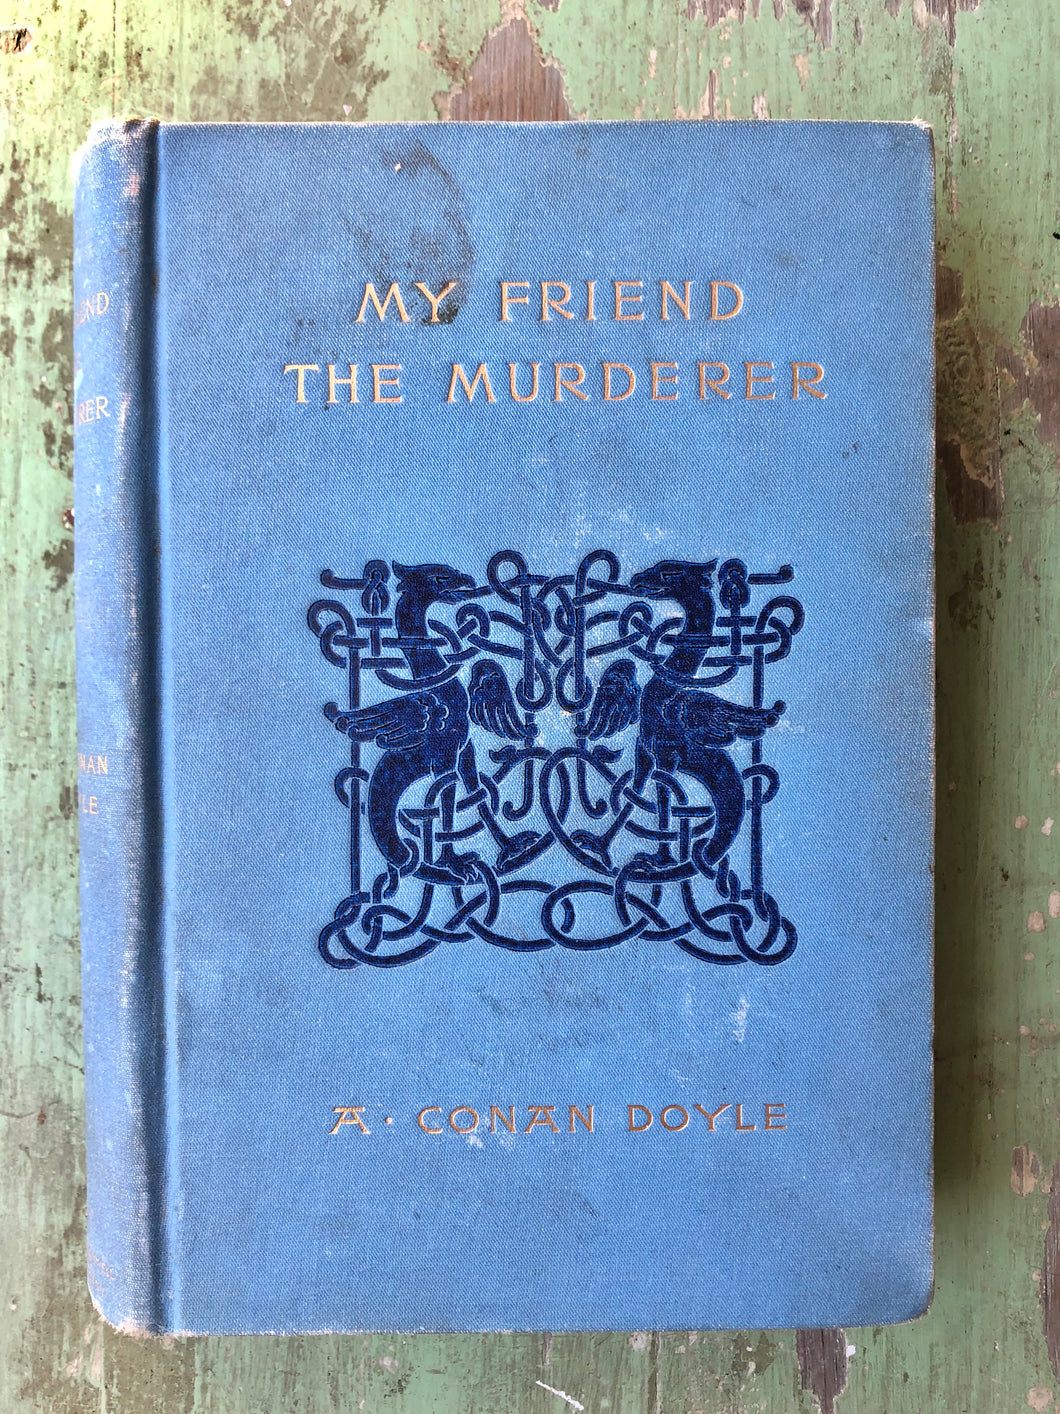 My Friend the Murderer and Other Mysteries and Adventures by A. Conan Doyle